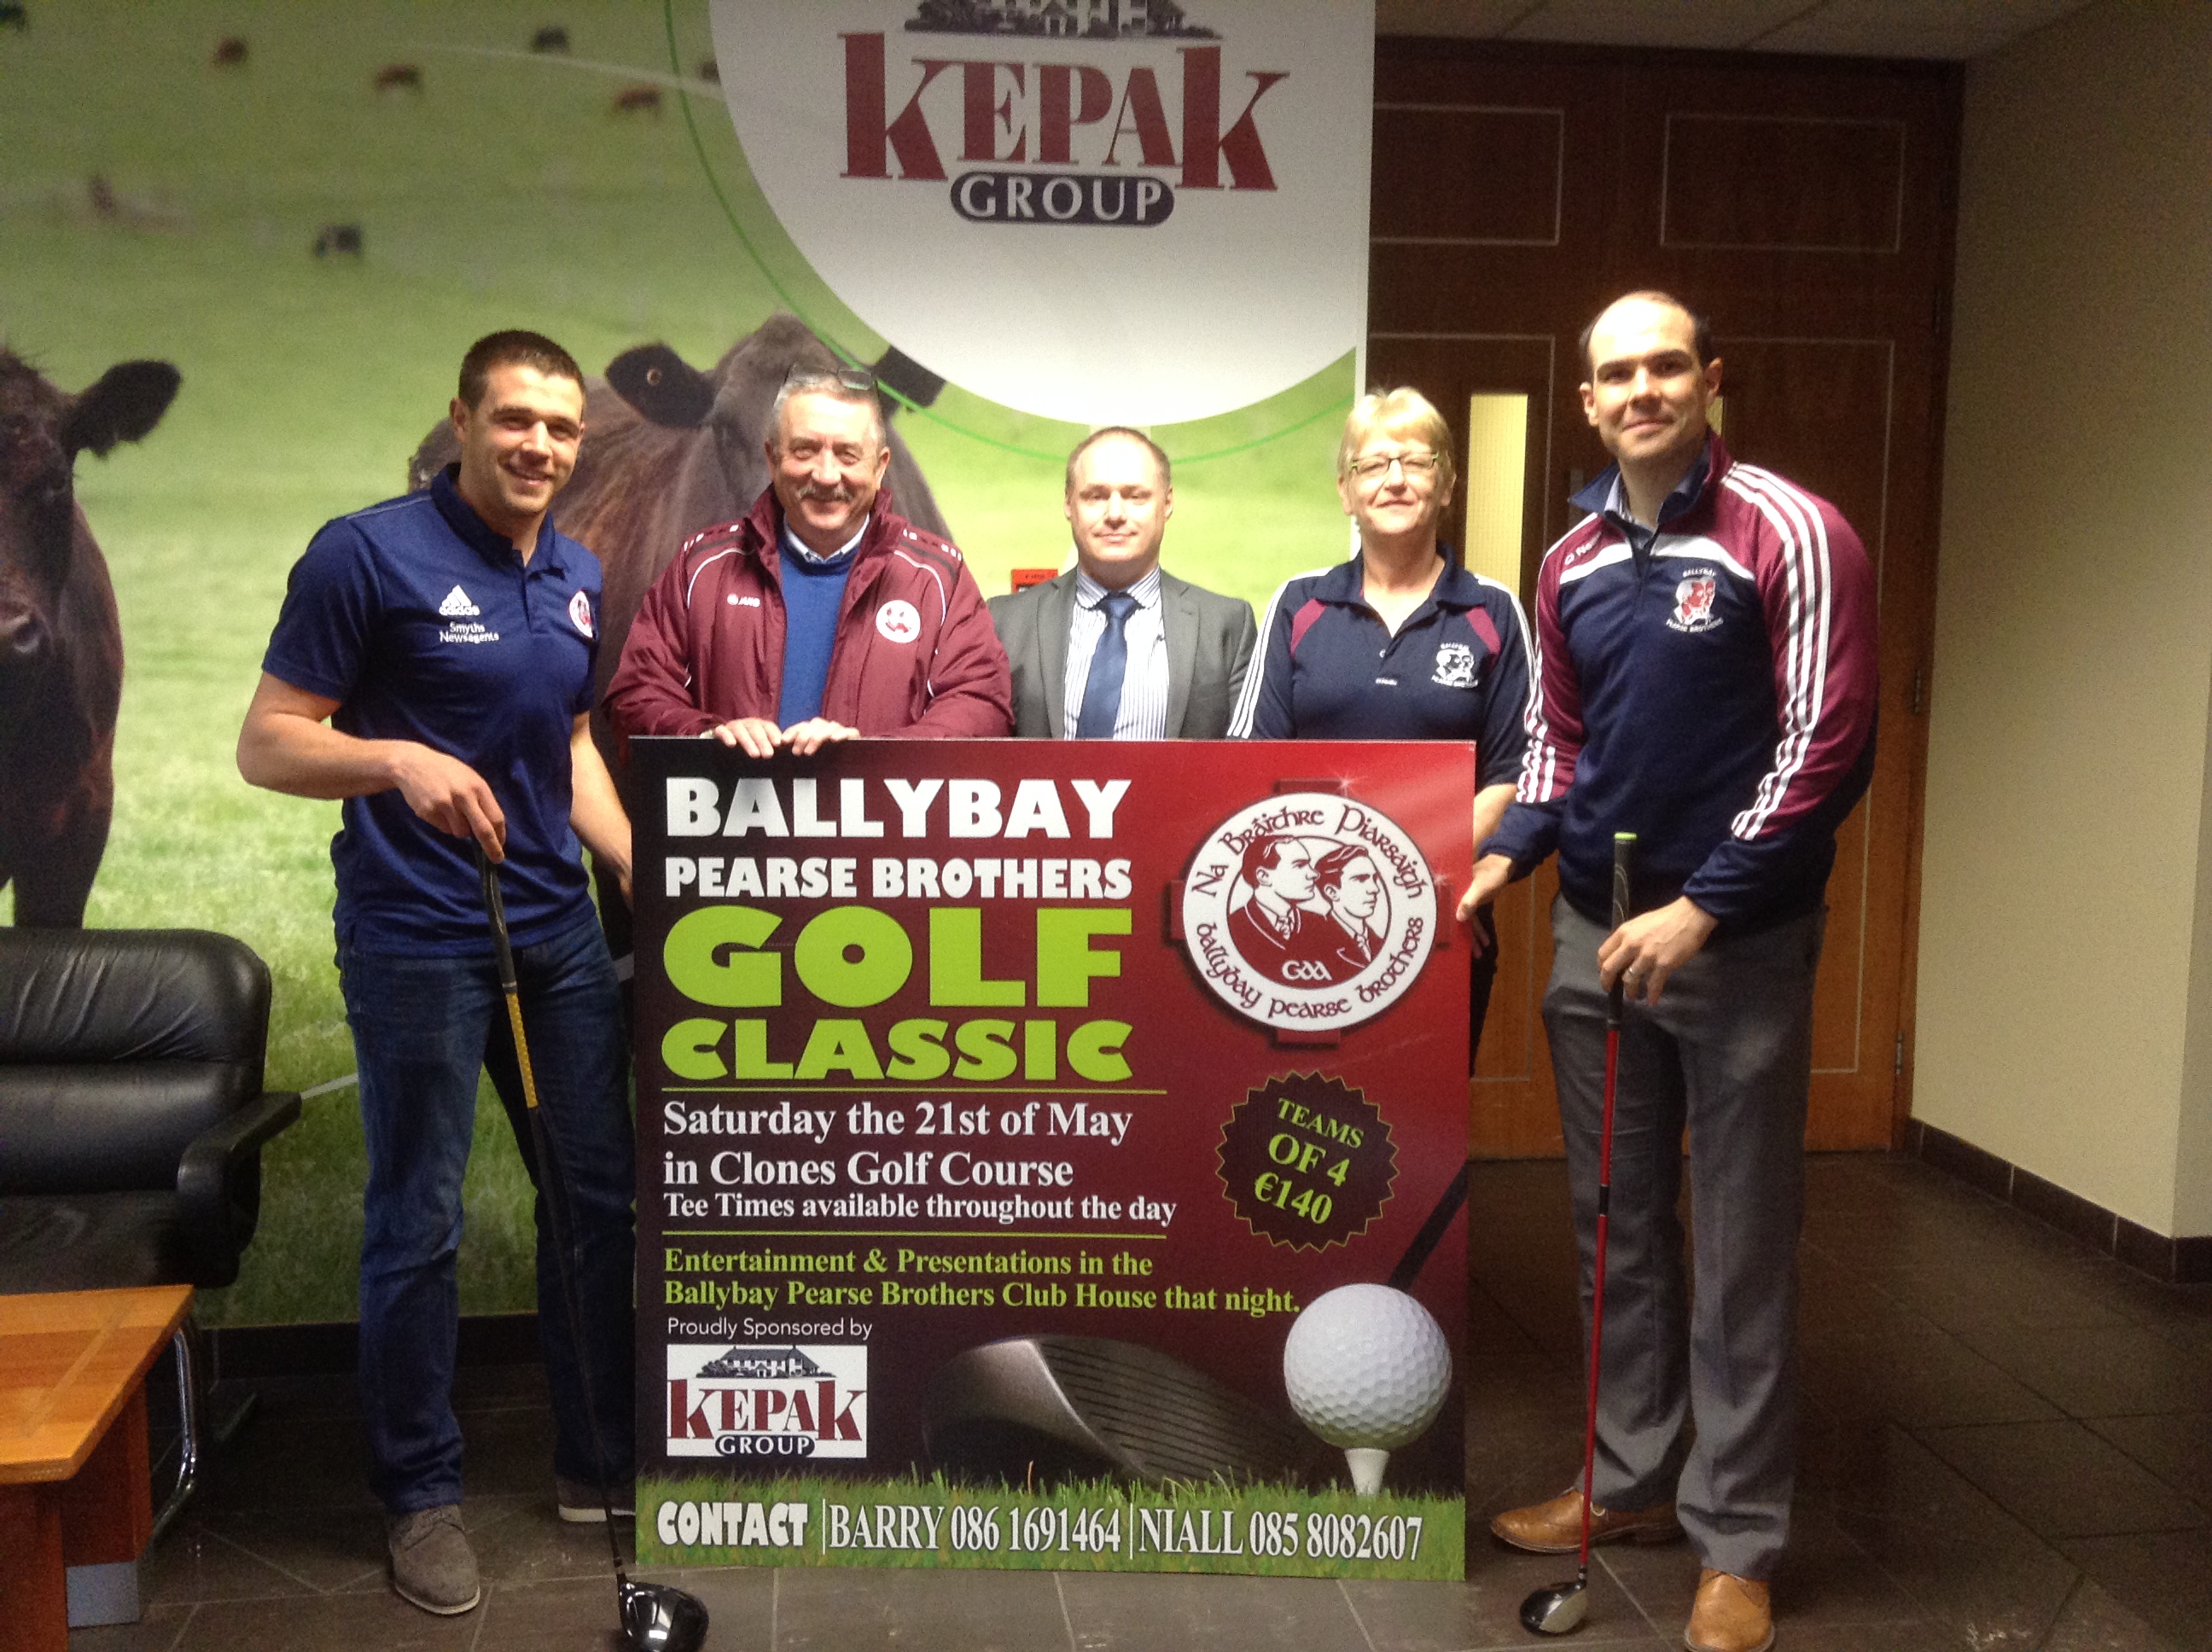 Ballybay Pearse Brothers Golf Classic – 21st May 2016